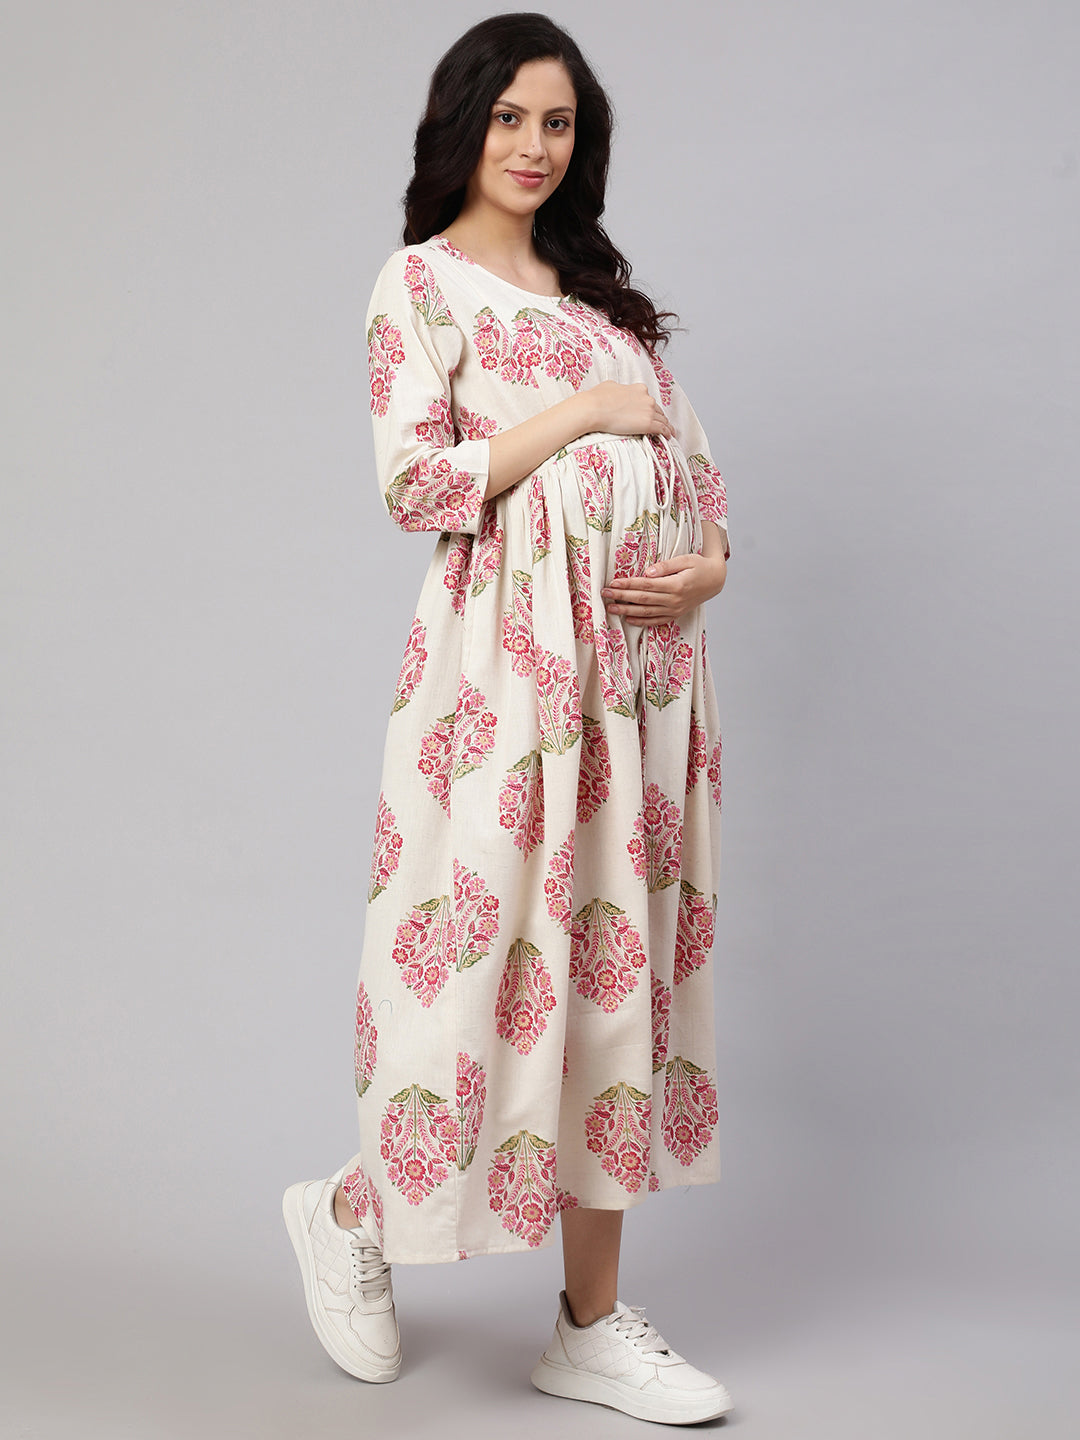 Women's Off White & Blue Floral Printed Maternity Dress With Three Quarter Sleeves - Nayo Clothing